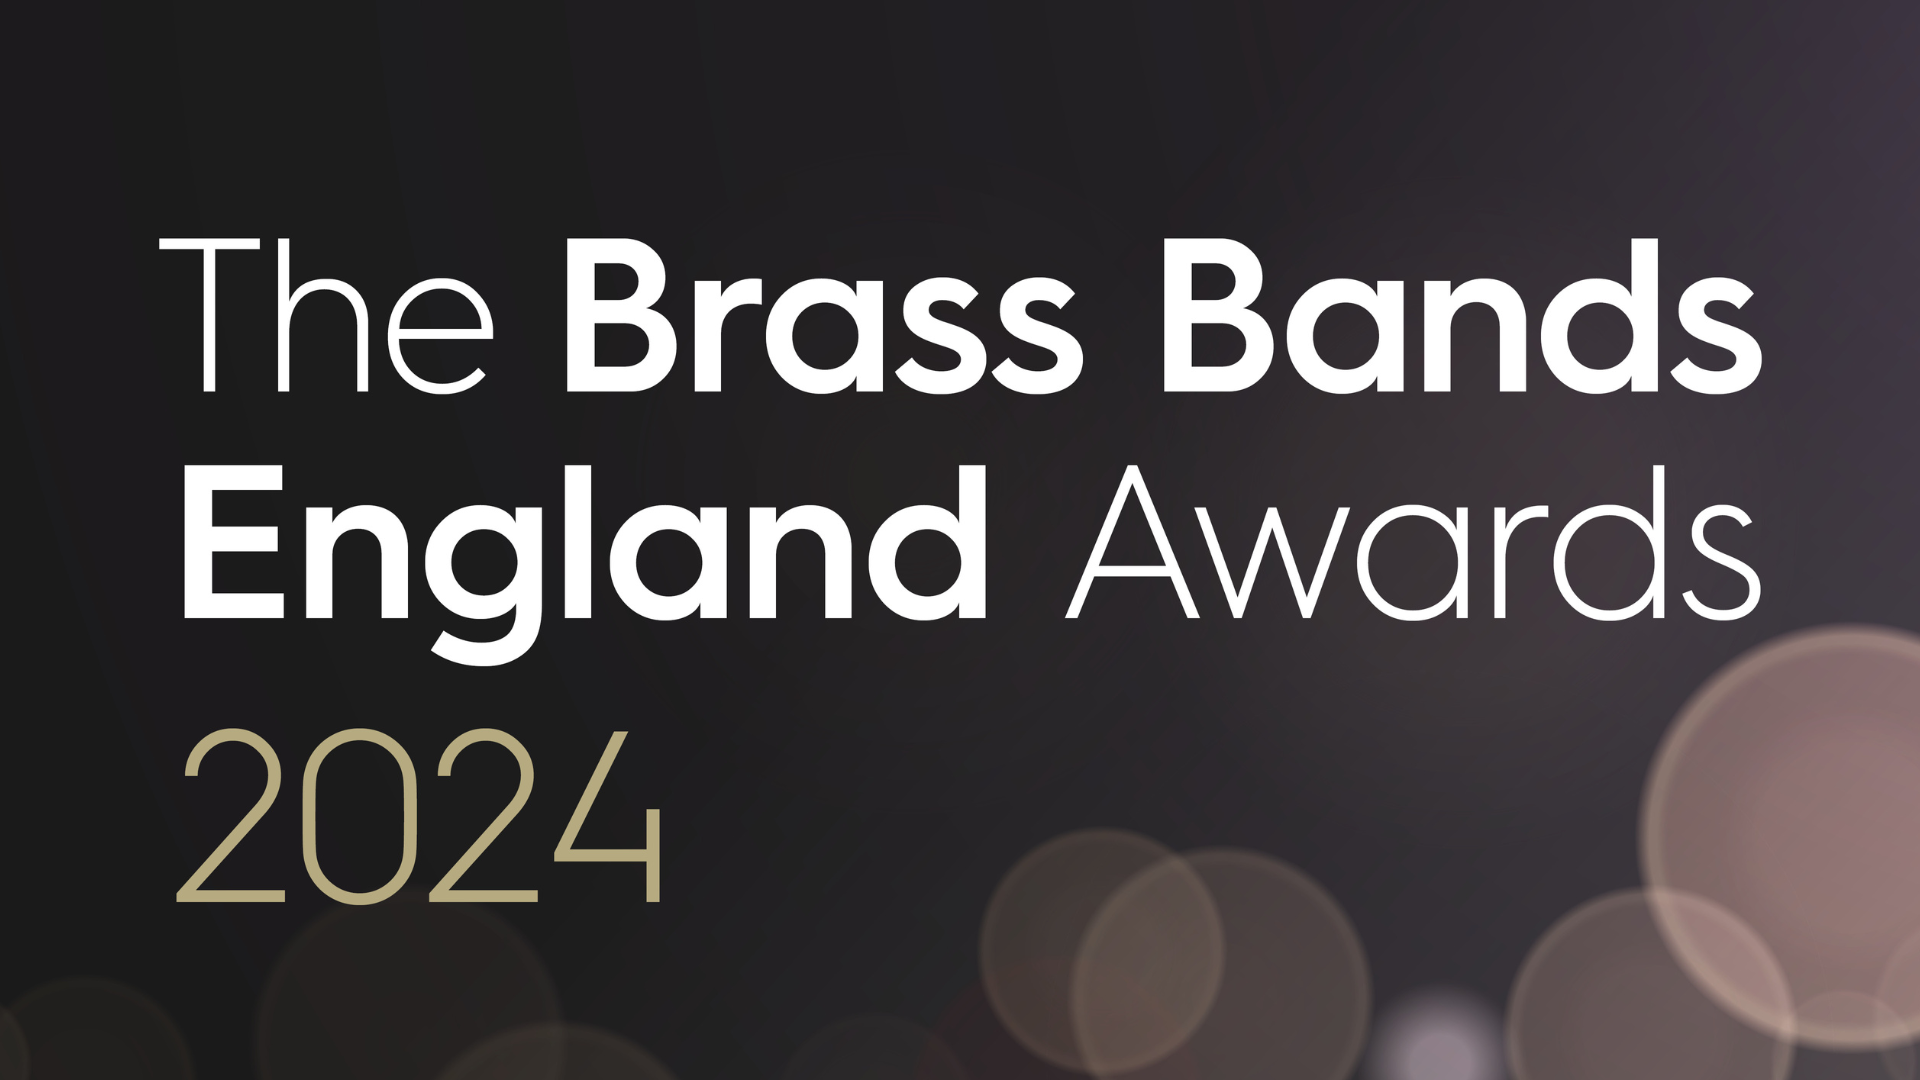 See the shortlist for the Brass Bands England Awards 2024